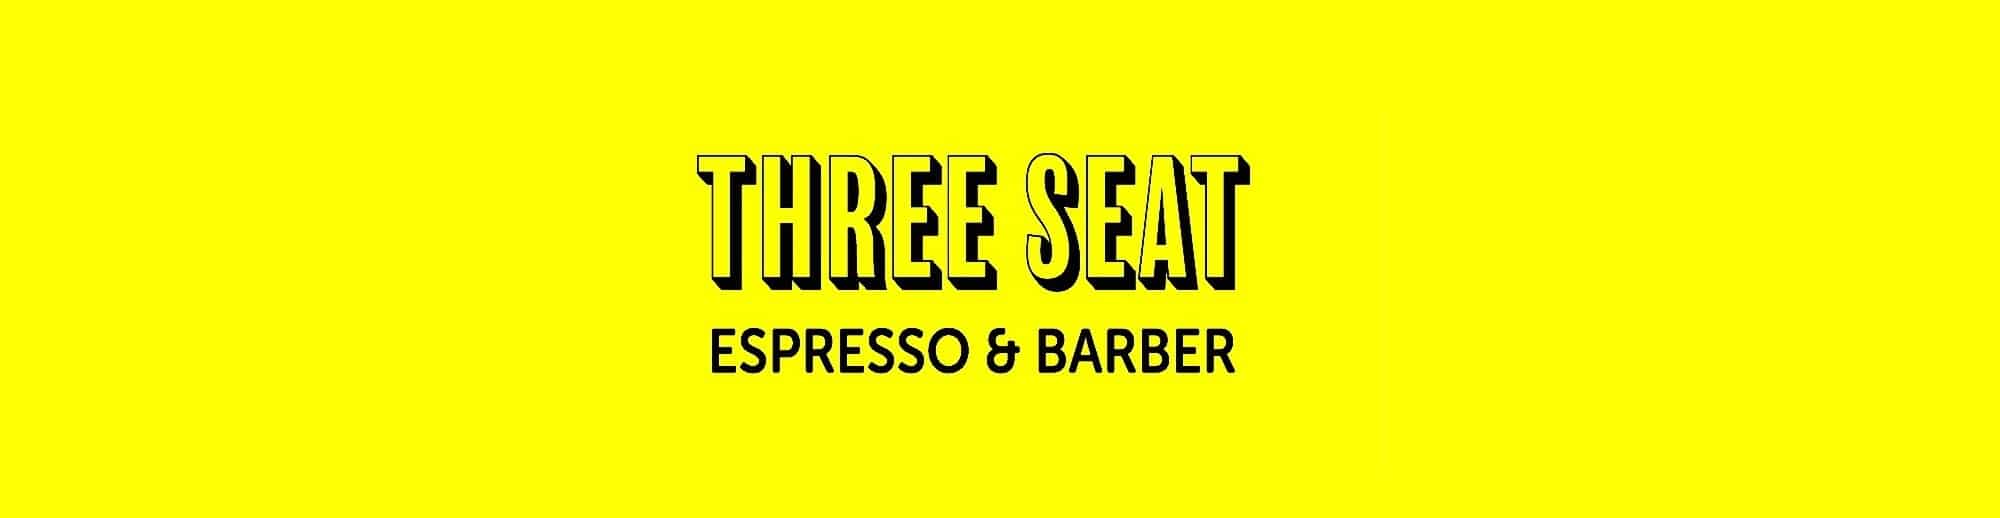 Aussie Cafés in NYC – and where to find them:  Three Seat Espresso & Barber